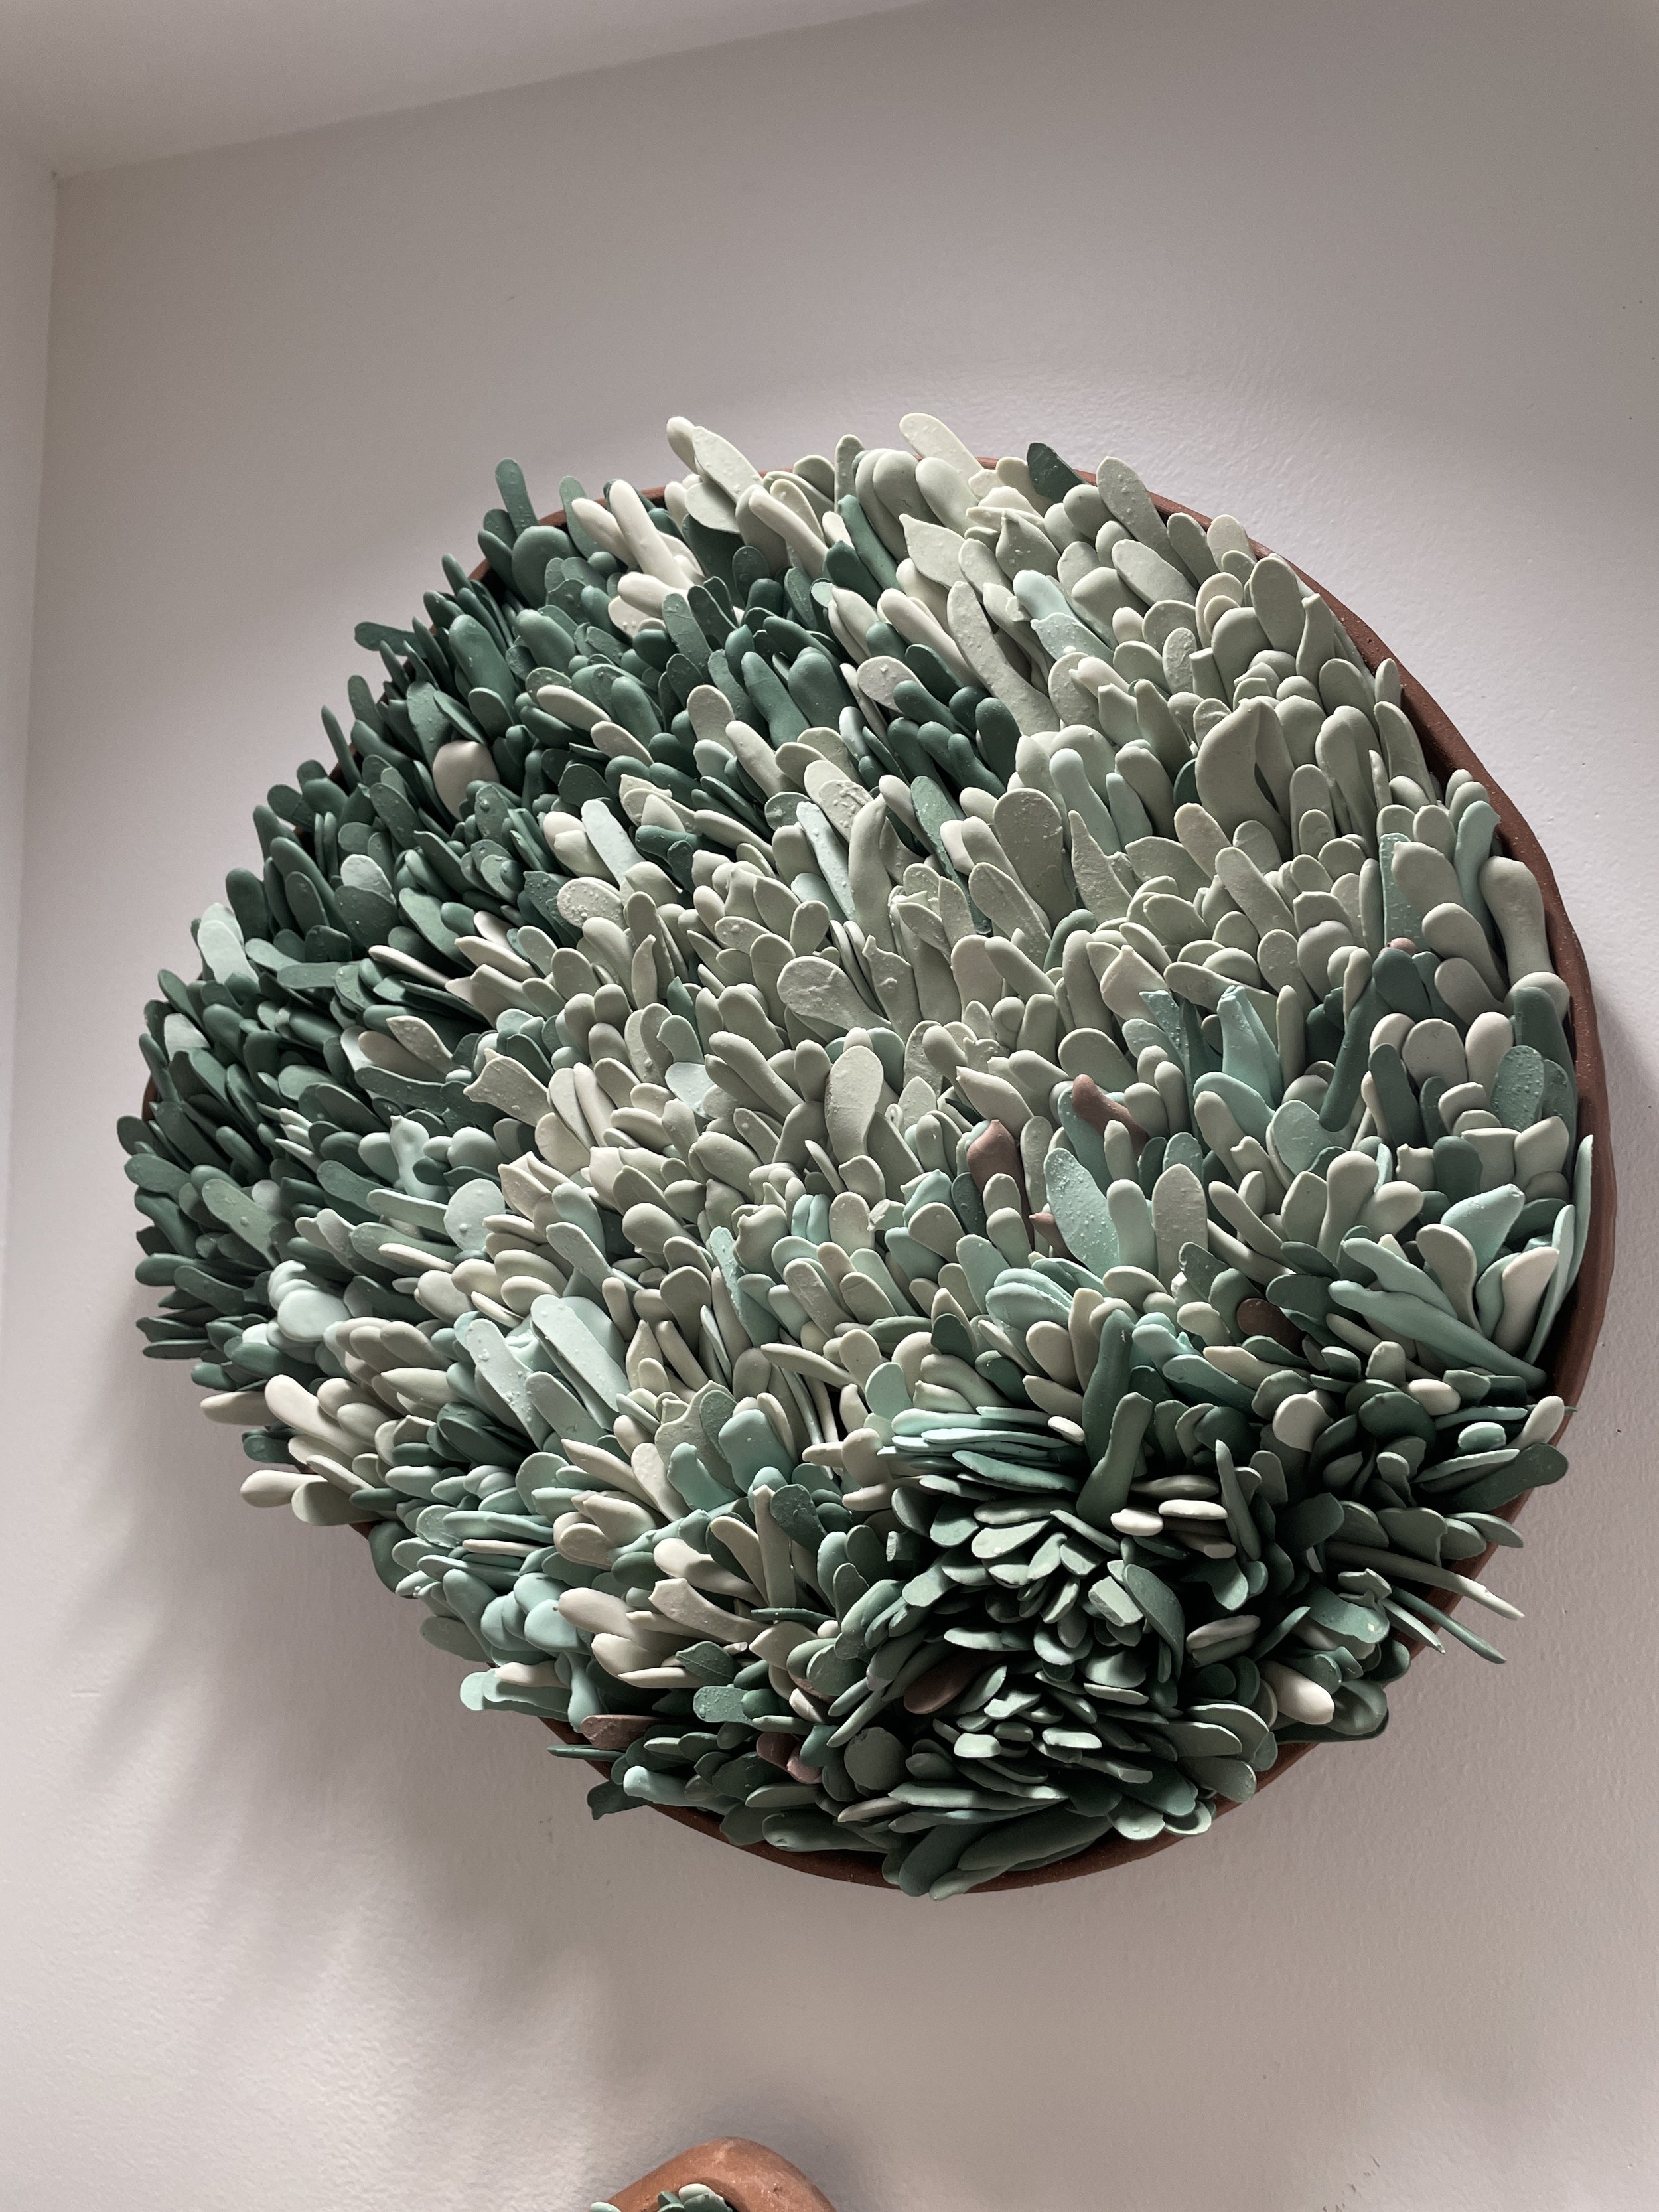  Round wall art sculpture with shades of green pieces created by Lauren HB Studio availably for purchase online and display 